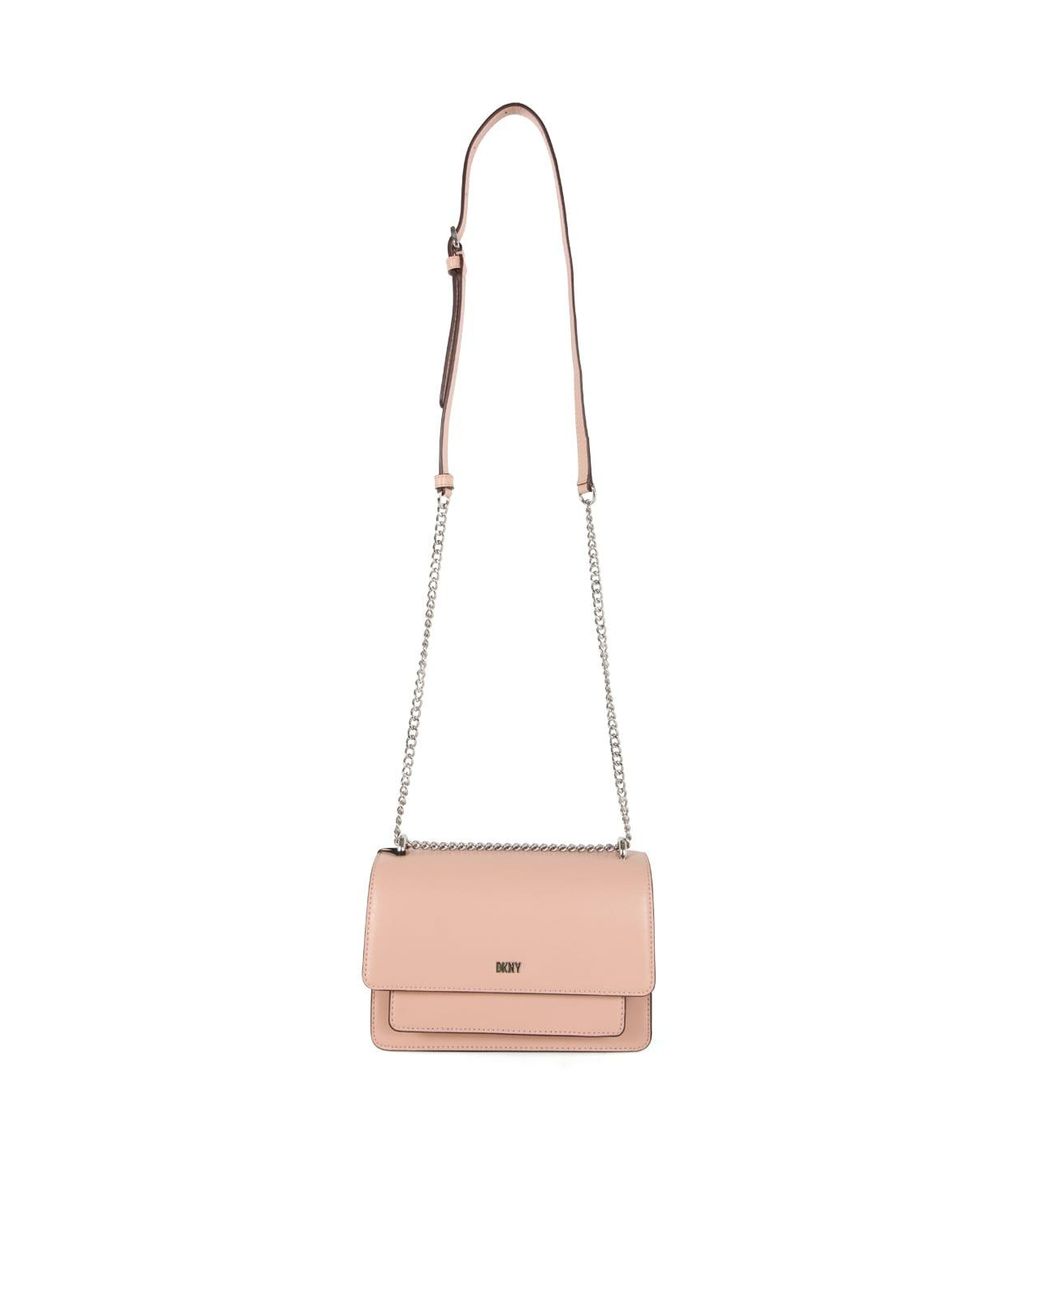 Dkny Bryant Small Chain Flap Bag - Pink